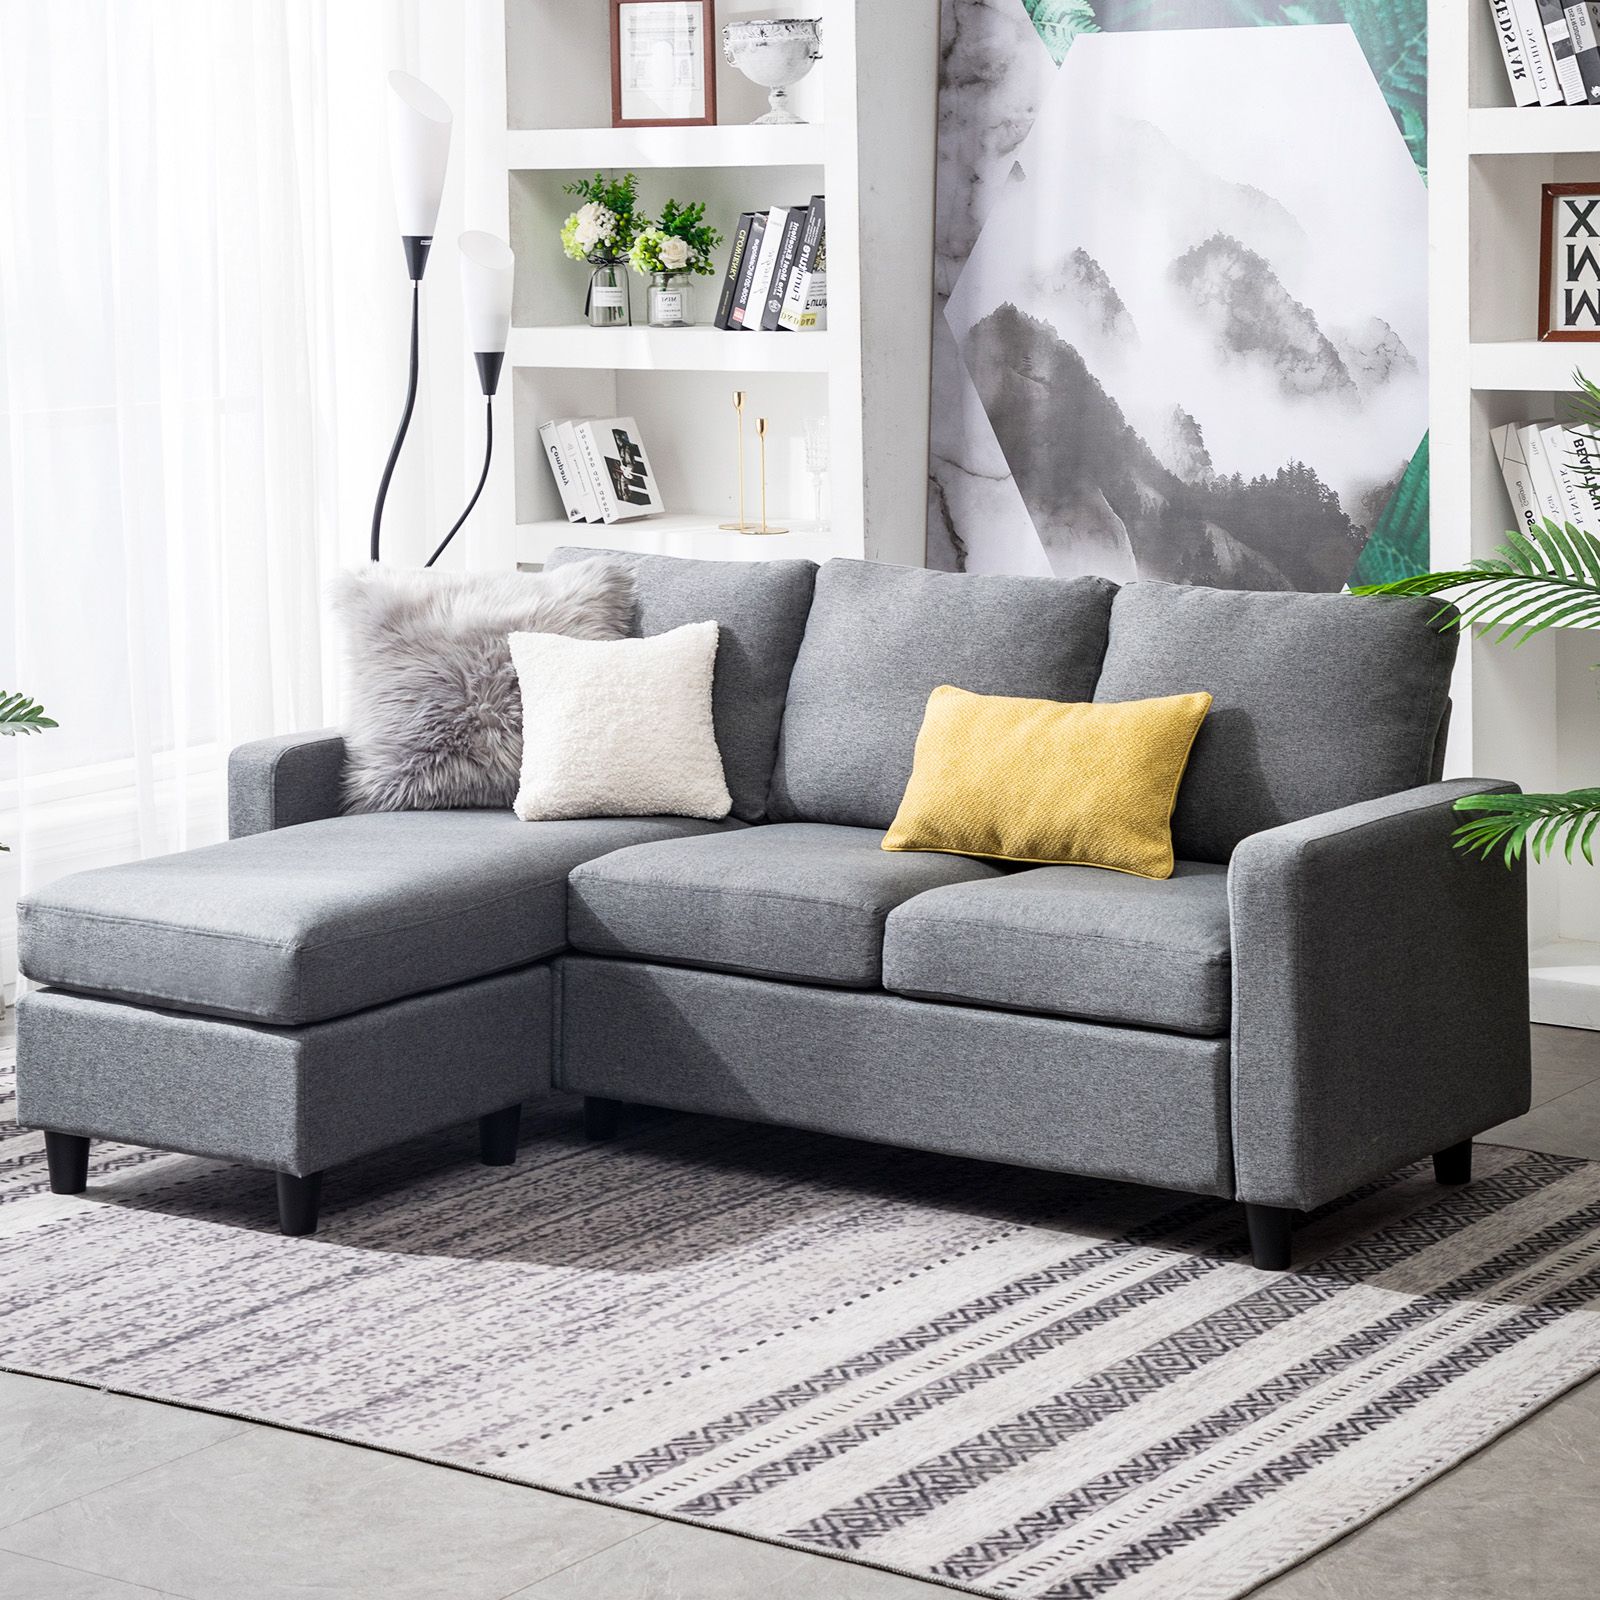 Grey Sectional Sofa L Shaped Couch W/reversible Chaise For Small Space Pertaining To L Shape Couches With Reversible Chaises (View 7 of 20)